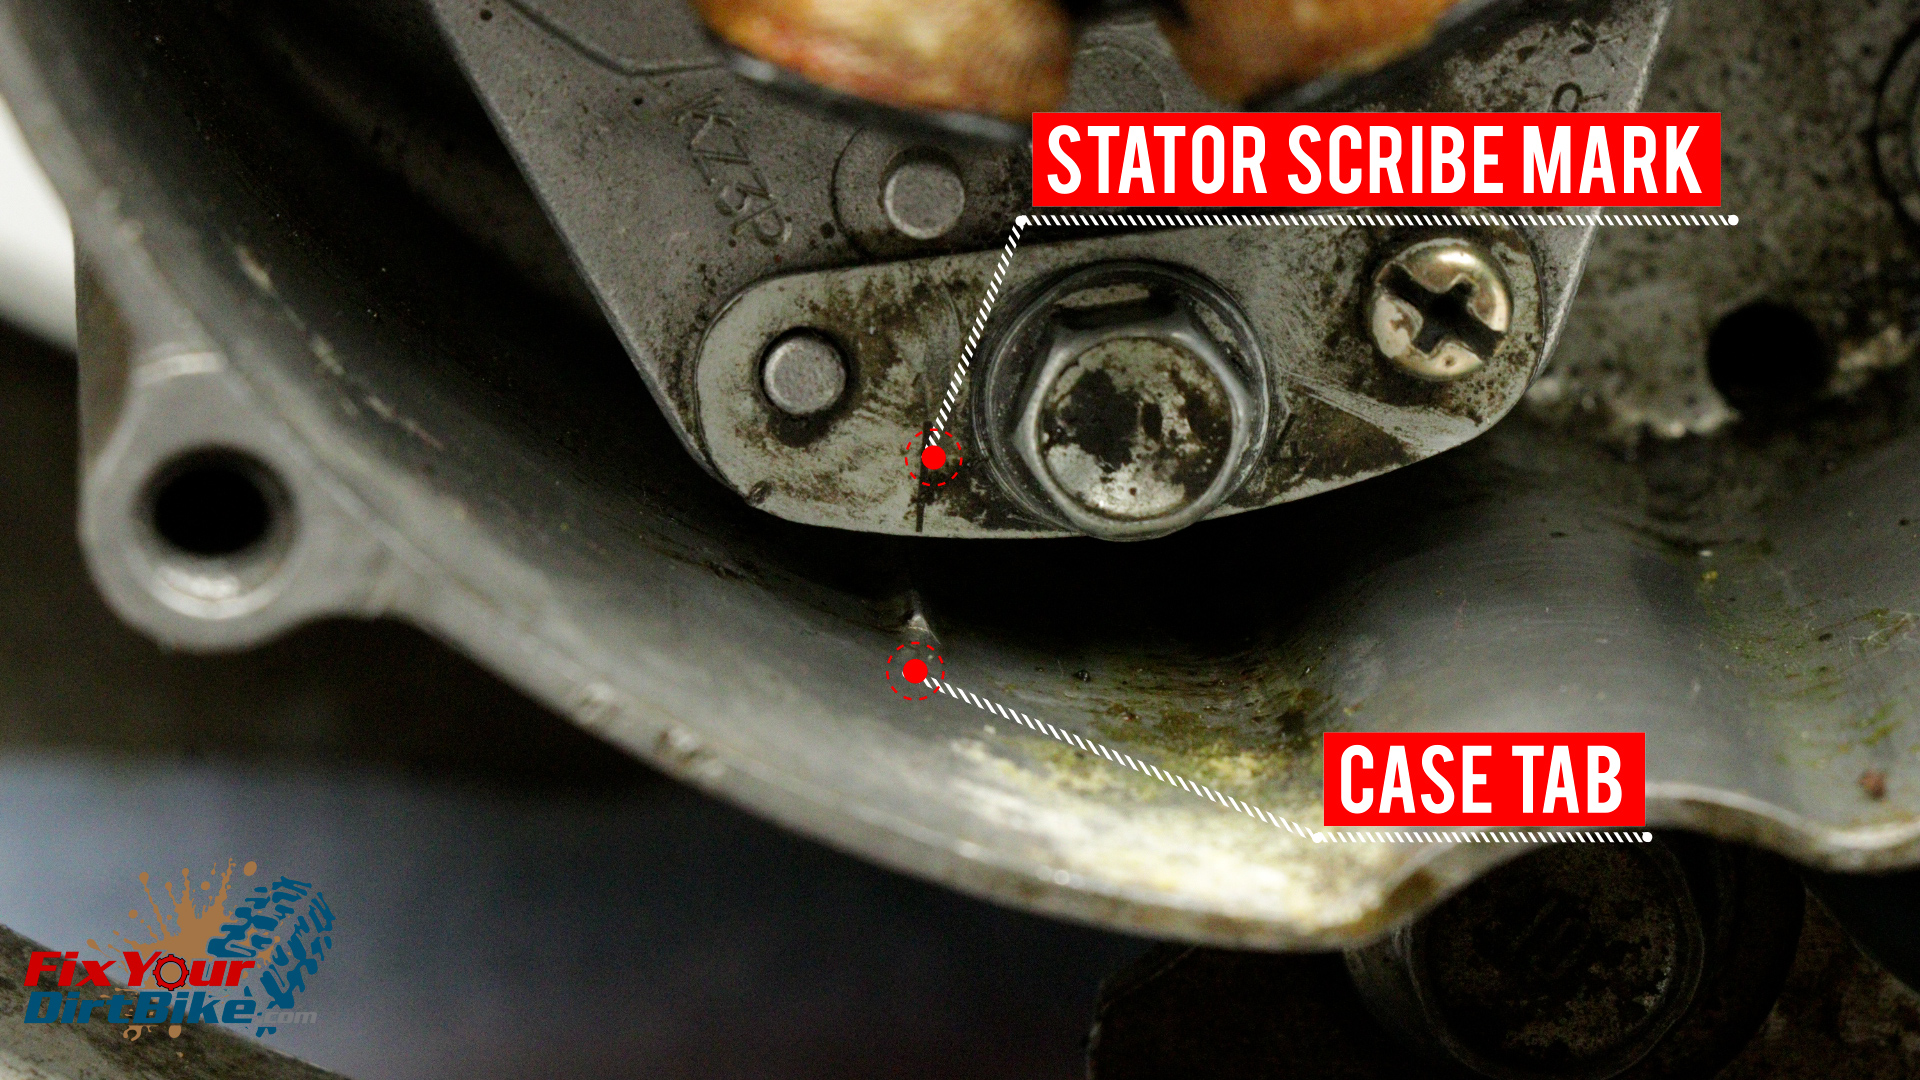 5 - Align The Stator Scribe Mark To The Tab on The Case